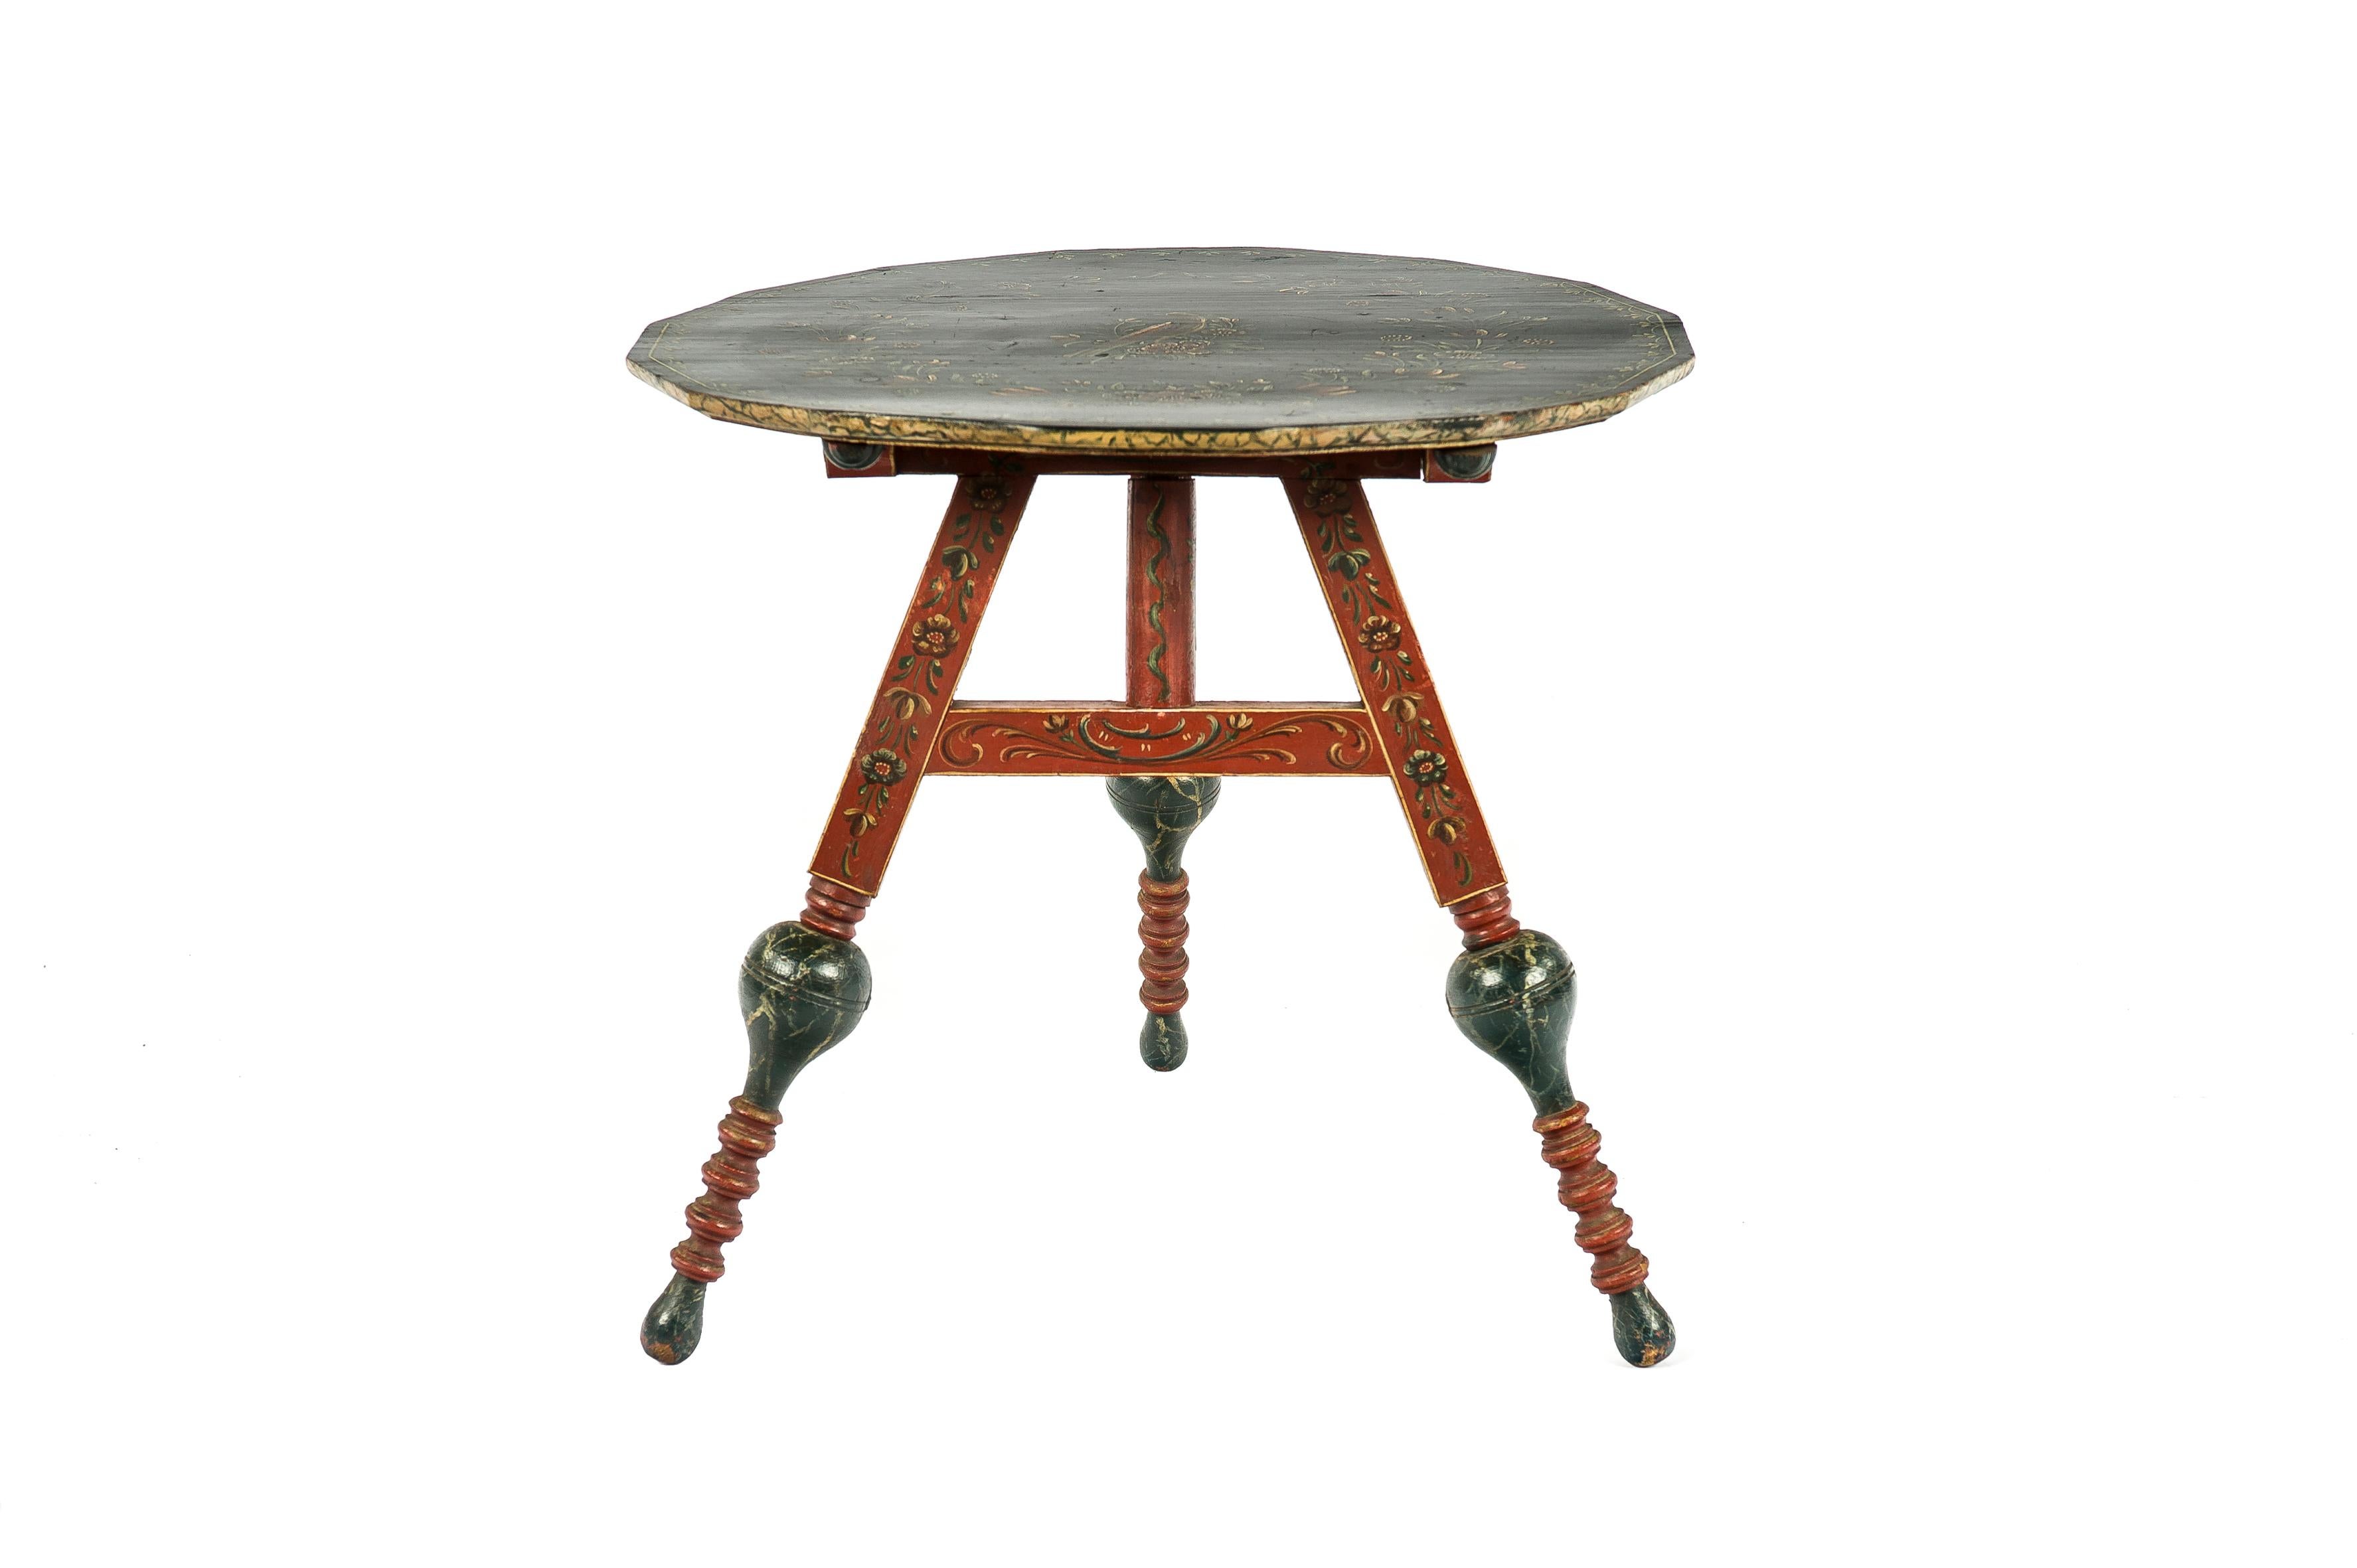 A beautiful antique tilt top table that was made in the Northern Netherlands, more specifically Hindeloopen in the late 1800s. The table is made of solid pine and is completely decorated. In the Netherlands, the tables are called flap-on-the-wall.